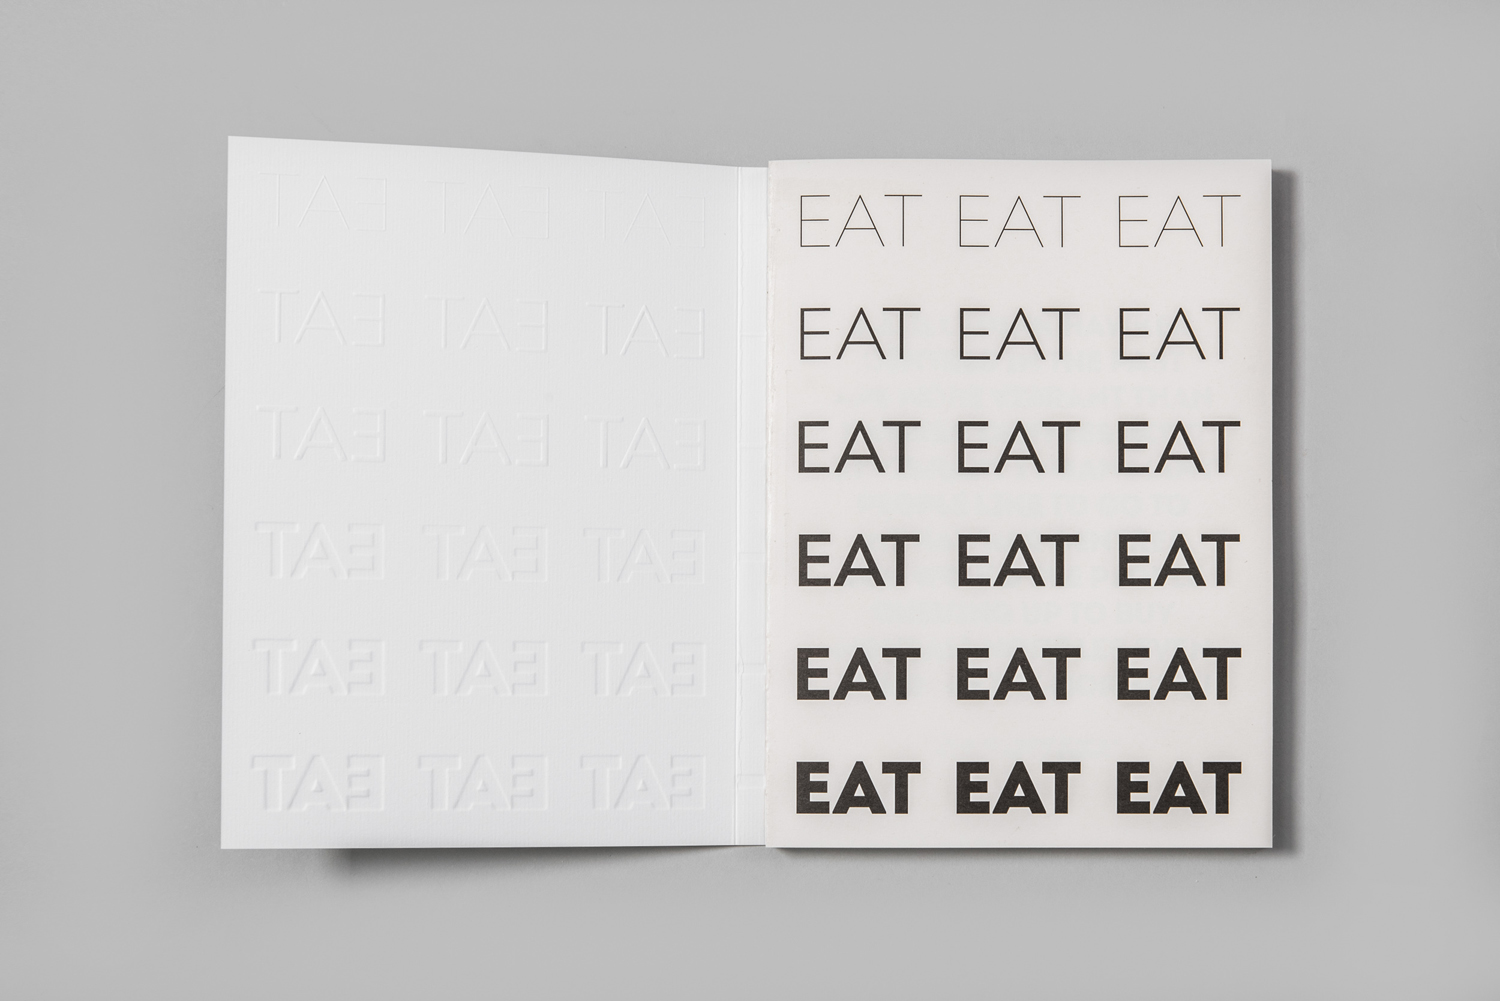 Logotype and print with blind emboss detail by Fable for EAT, the second installation of a two-year long series of exhibitions on Singapore's food culture